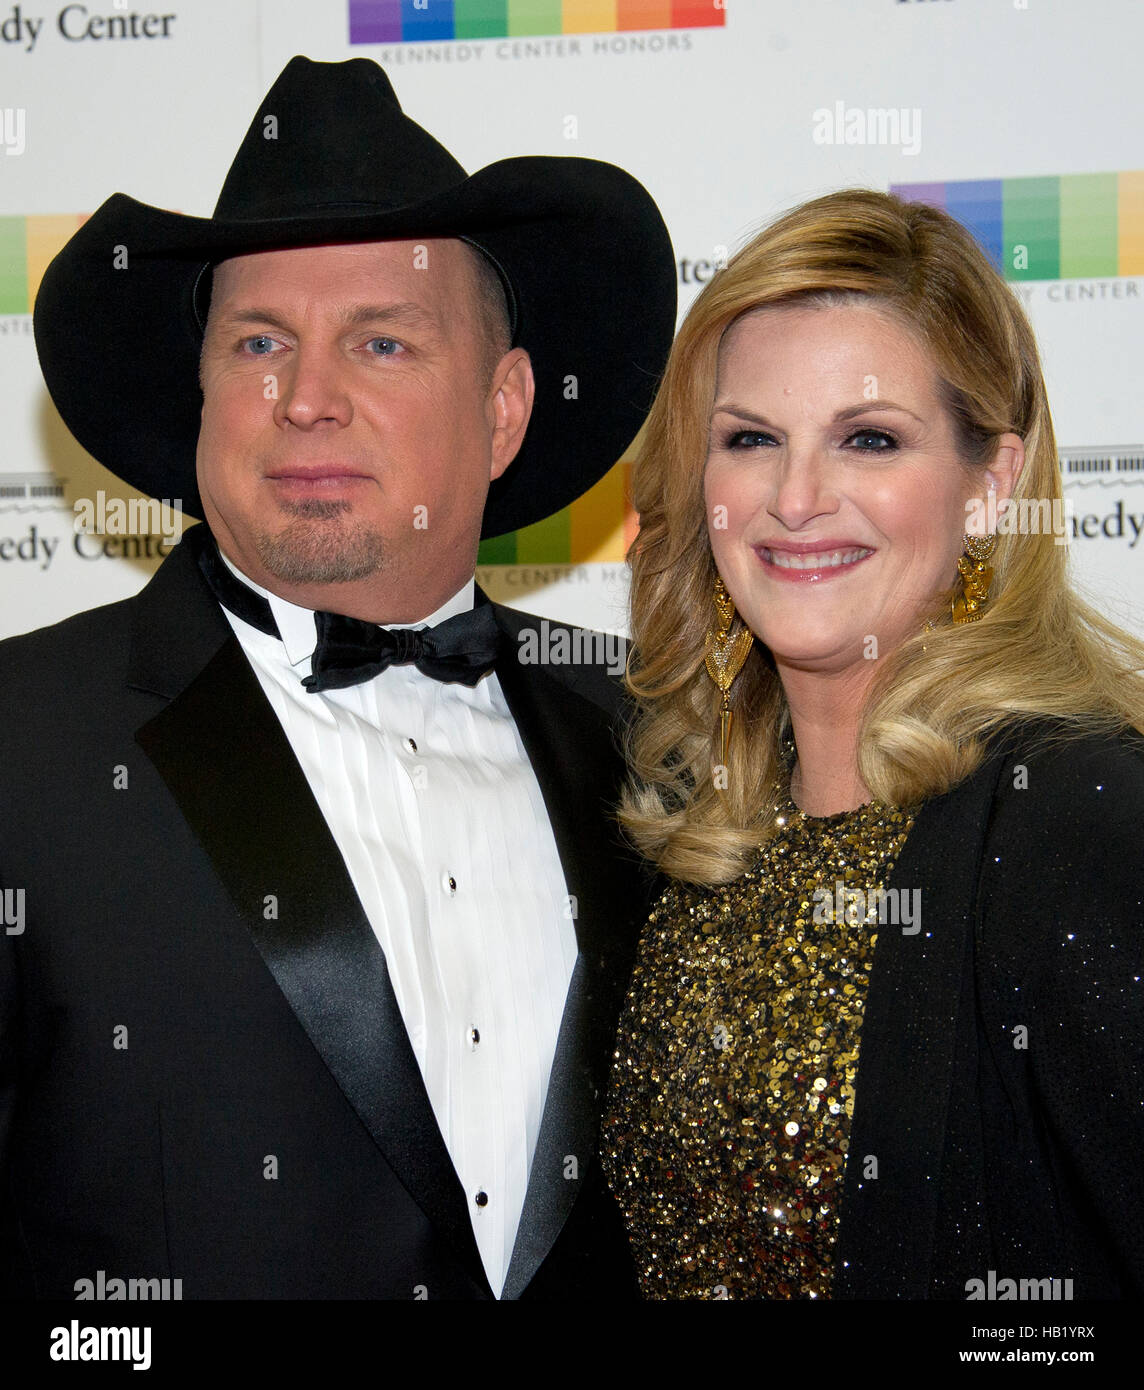 Washington DC, USA. 3rd Dec, 2016. Garth Brooks and Tricia Yearwood arrive for the formal Artist's Dinner honoring the recipients of the 39th Annual Kennedy Center Honors hosted by United States Secretary of State John F. Kerry at the U.S. Department of State in Washington, DC on Saturday, December 3, 2016. The 2016 honorees are: Argentine pianist Martha Argerich; rock band the Eagles; screen and stage actor Al Pacino; gospel and blues singer Mavis Staples; and musician James Taylor. Credit:  MediaPunch Inc/Alamy Live News Stock Photo